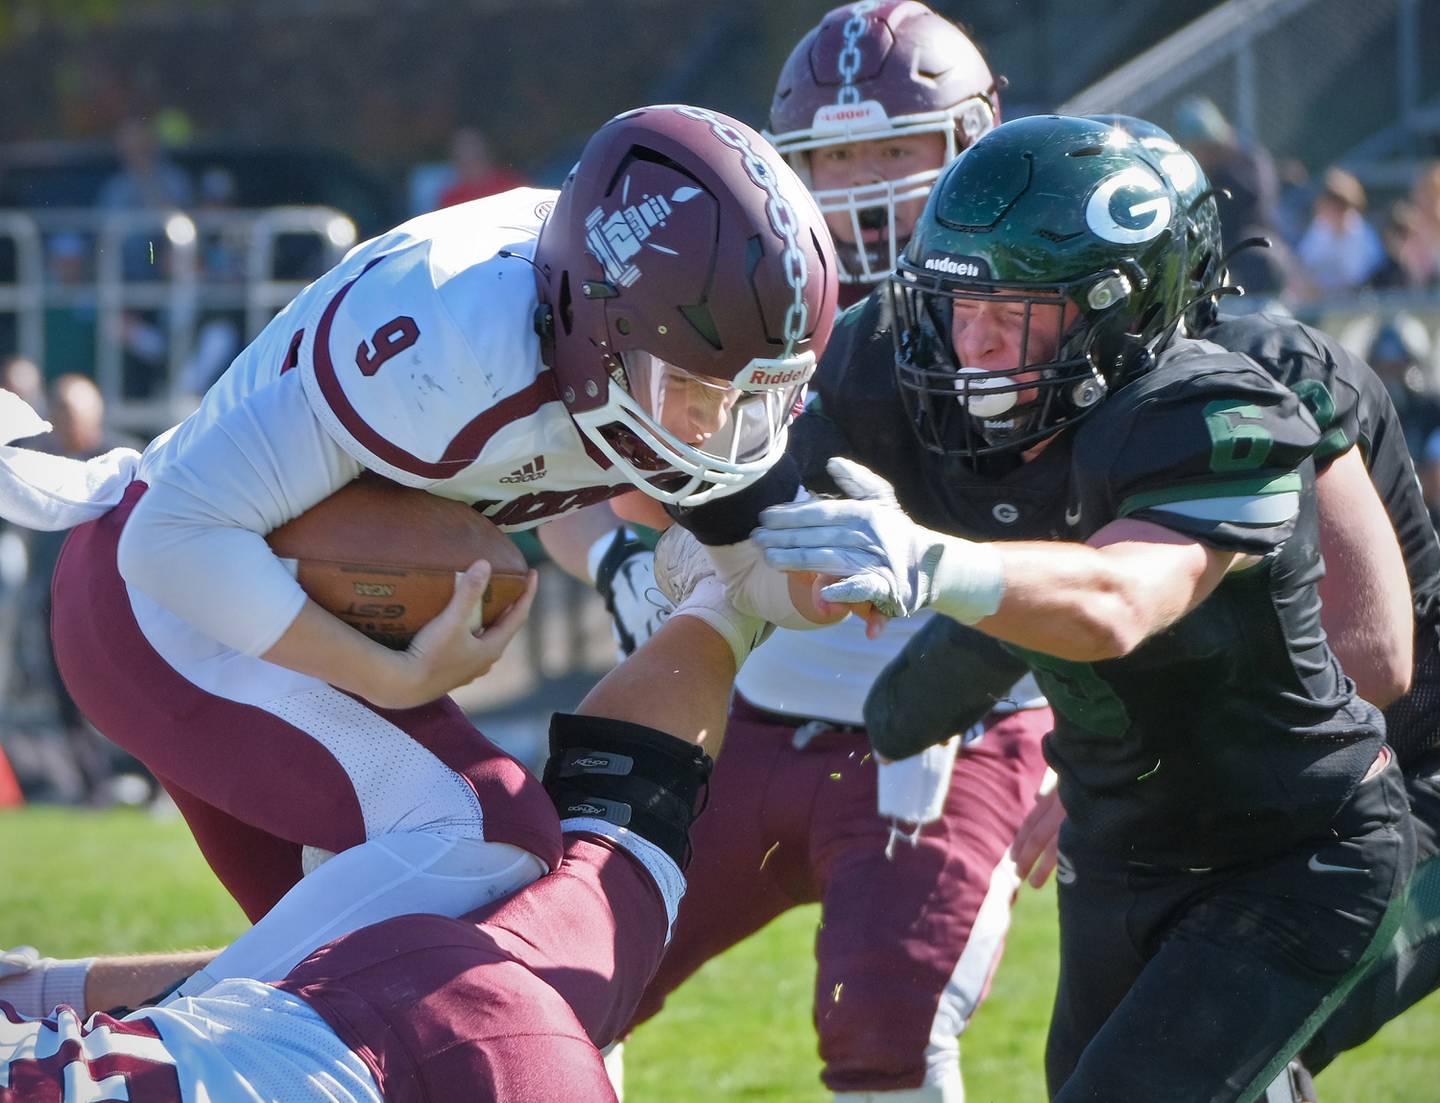 Lockport's Brady Pfeiffer (9) is met by Glenbard West's Ben Starmann (right) as he goes over the top during an IHSA Class 8A playoff game on Oct. 29, 2022 at Glenbard West High School in Glen Ellyn.